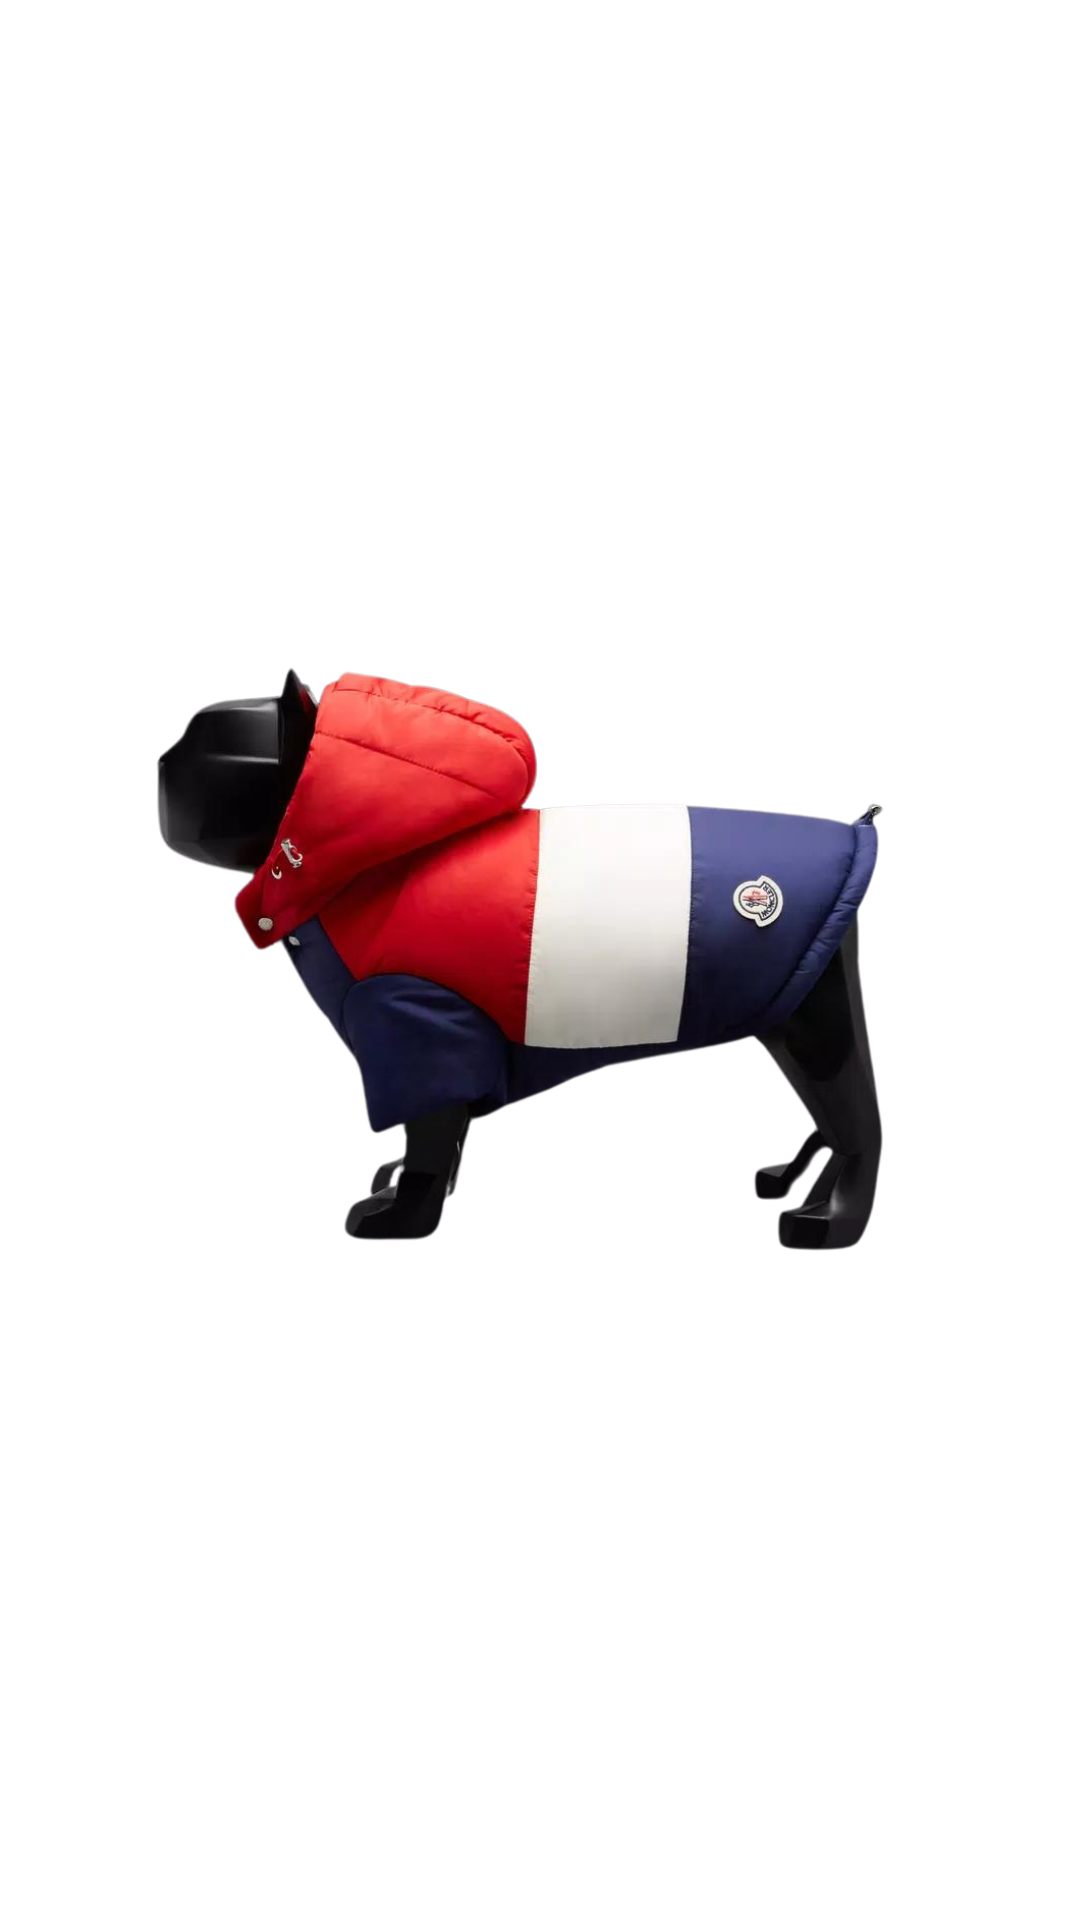 A Black and white dog wearing a Moncler puffer jacket in red, white and blue.